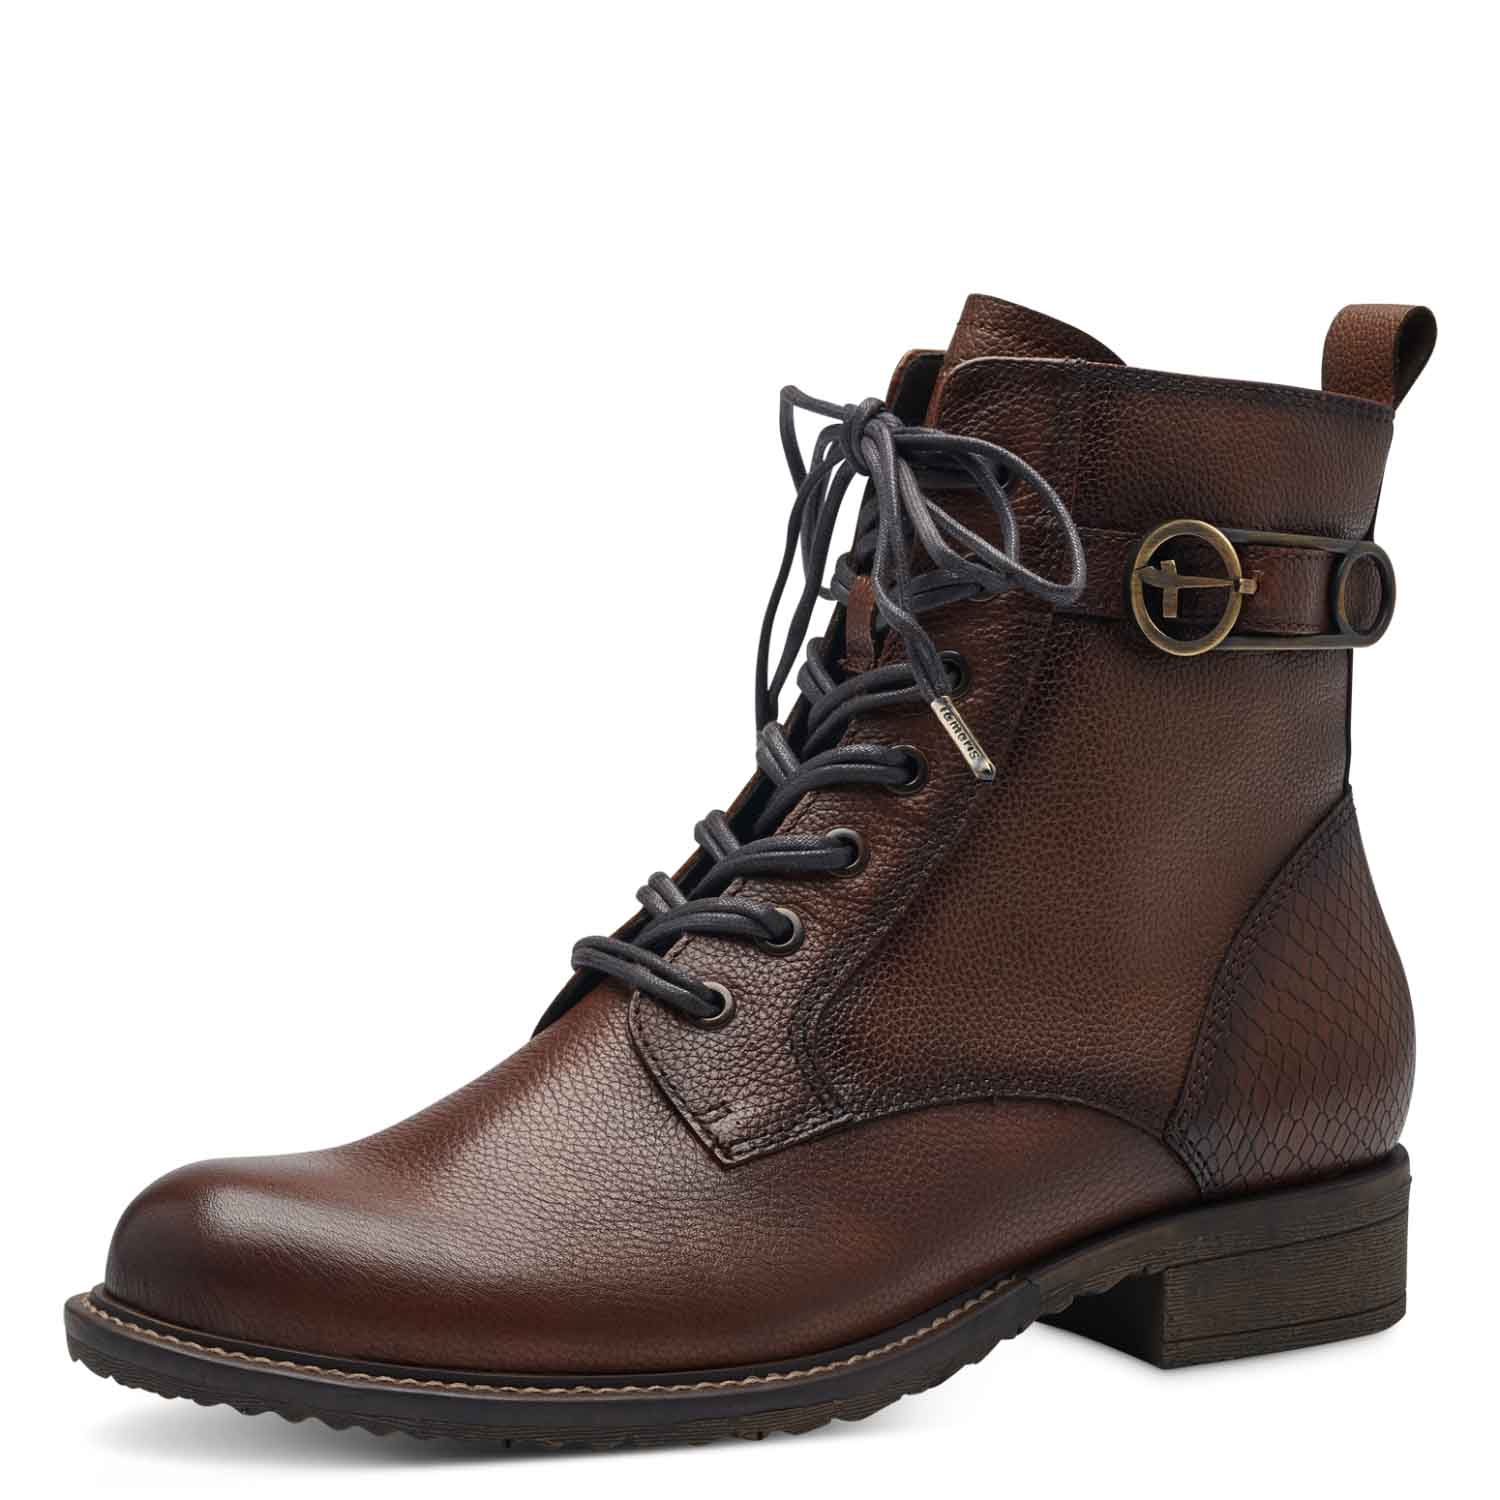 Angular view of the brown lace up boots, showcasing the textured heel design.